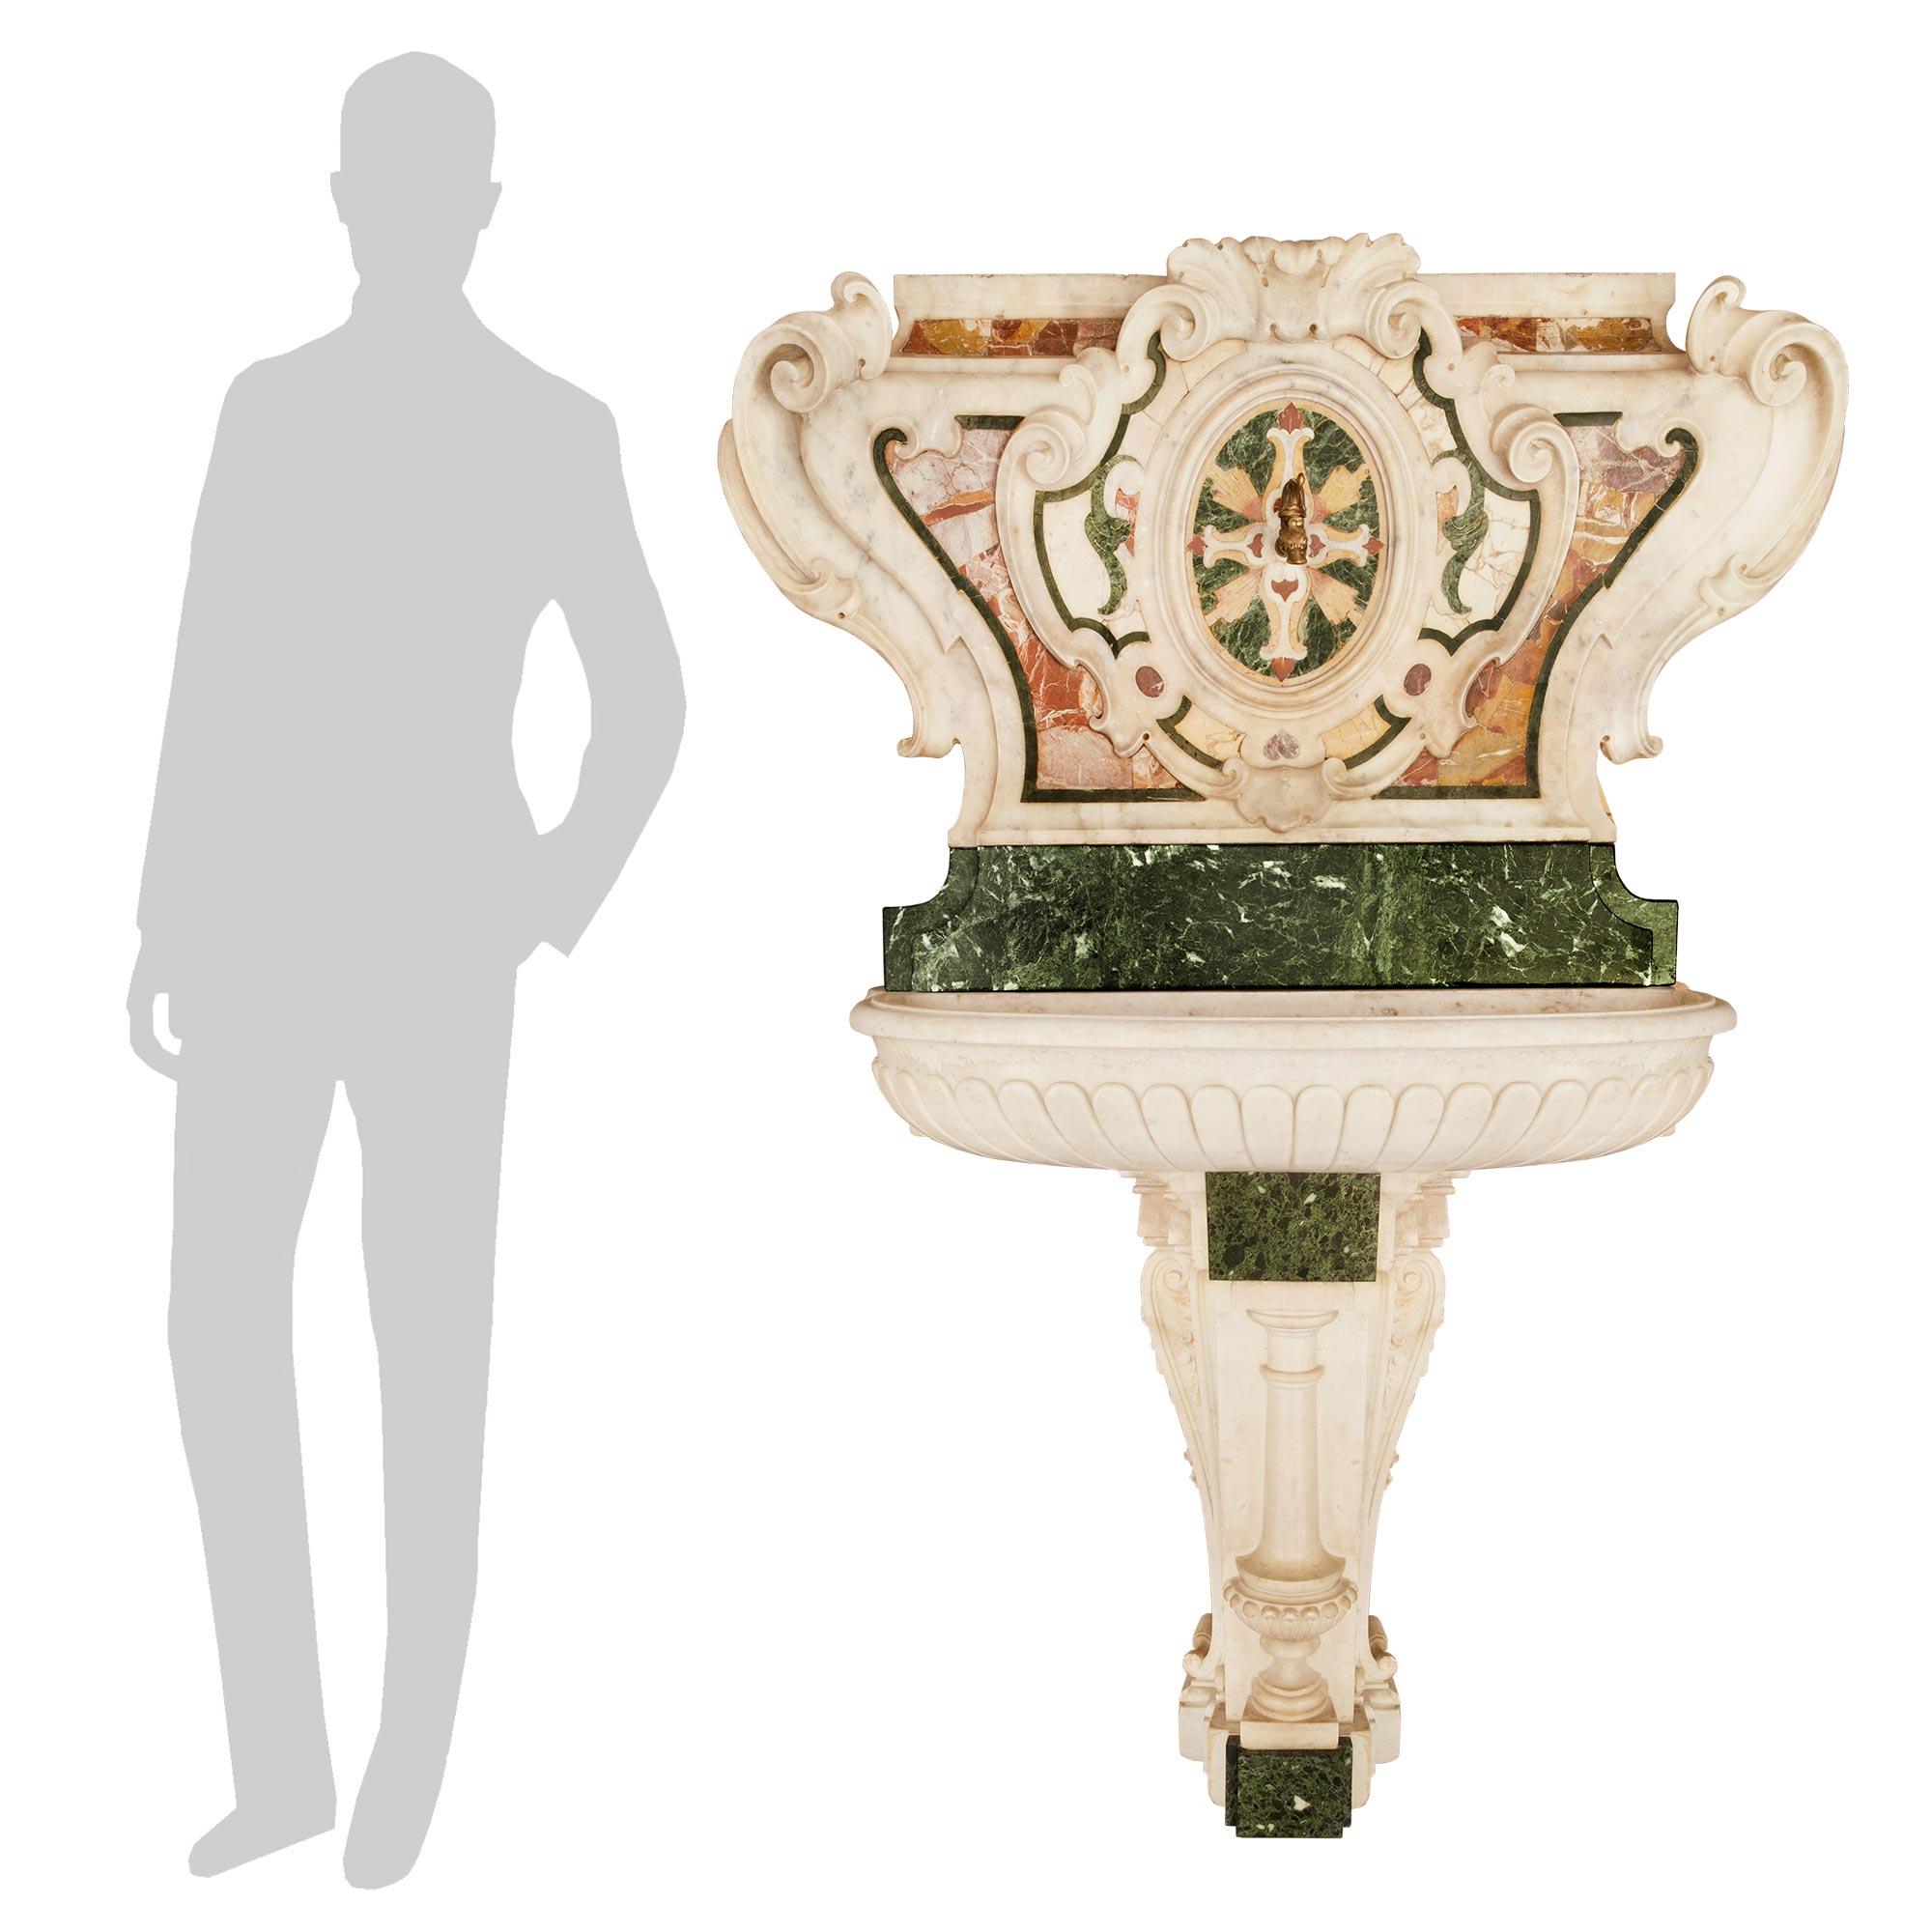 A most impressive and extremely decorative Italian 18th-century Baroque period marble fountain. The marble fountain is raised by a white Carrara marble and Vert De Patricia marble base. The base is with a front half round circular column flanked by